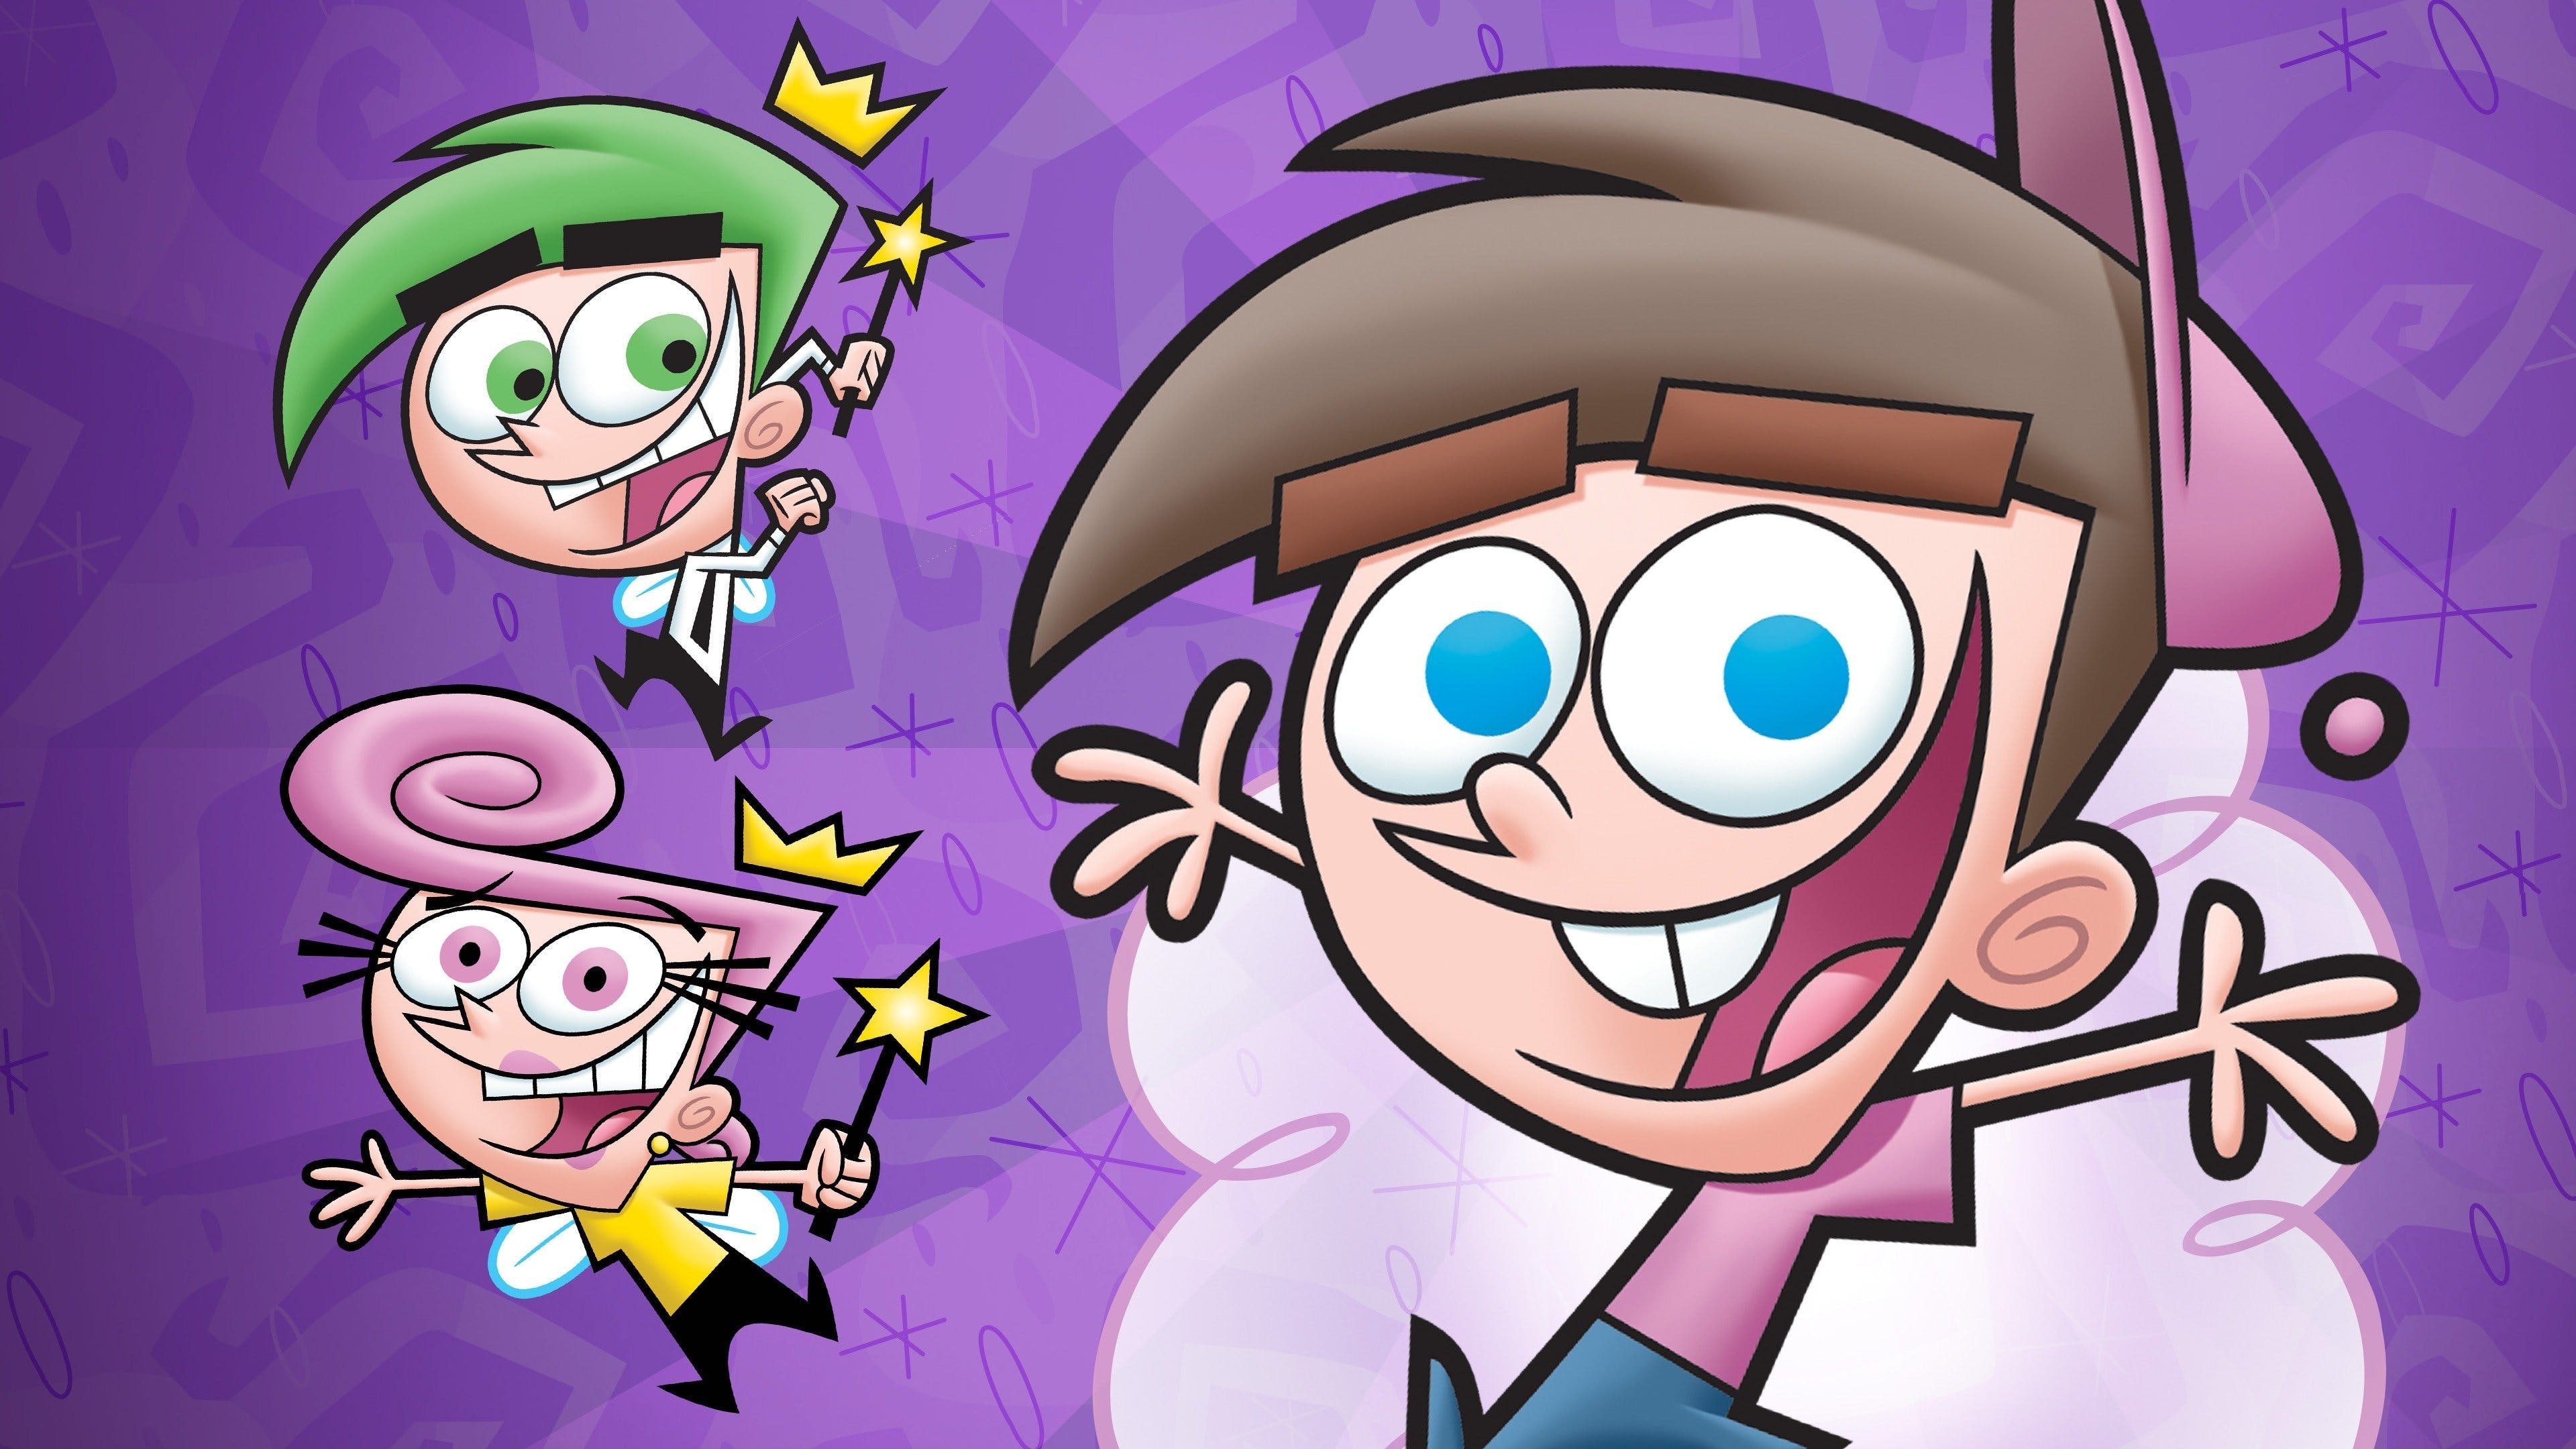 The Fairly OddParents, Animation, Cosmo, Wallpapers, 3840x2160 4K Desktop